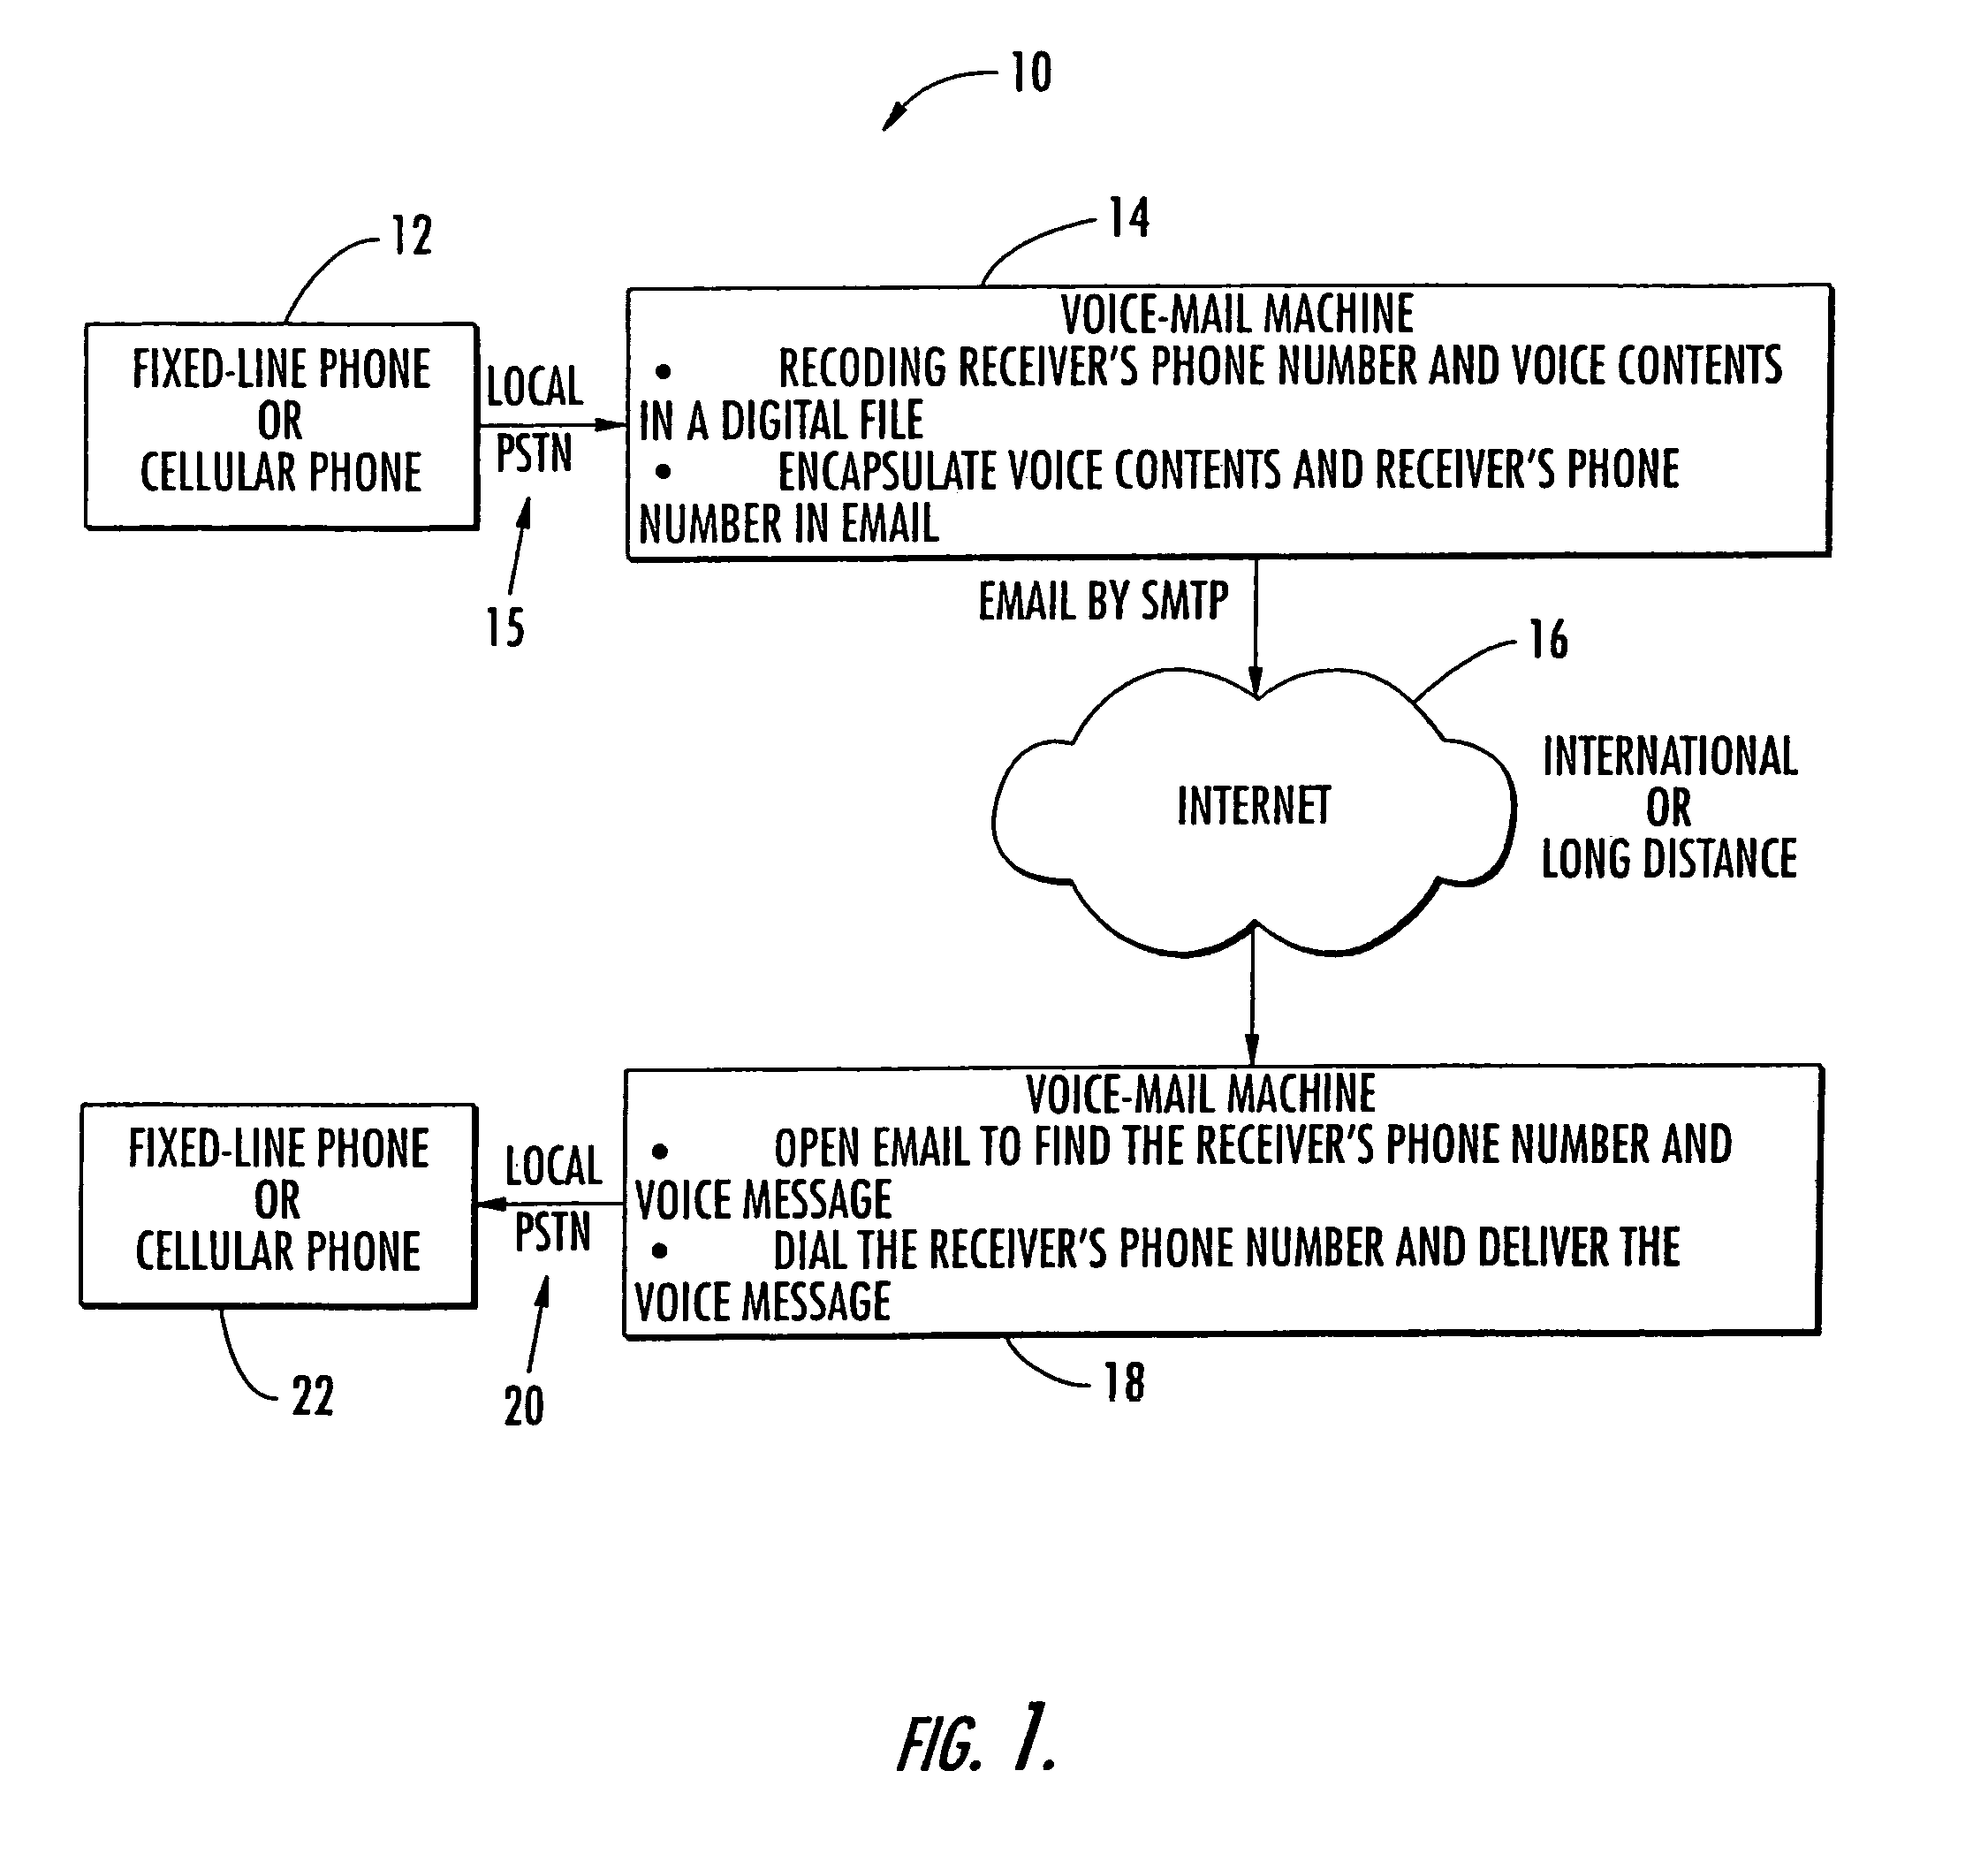 Voice message transfer between a sender and a receiver